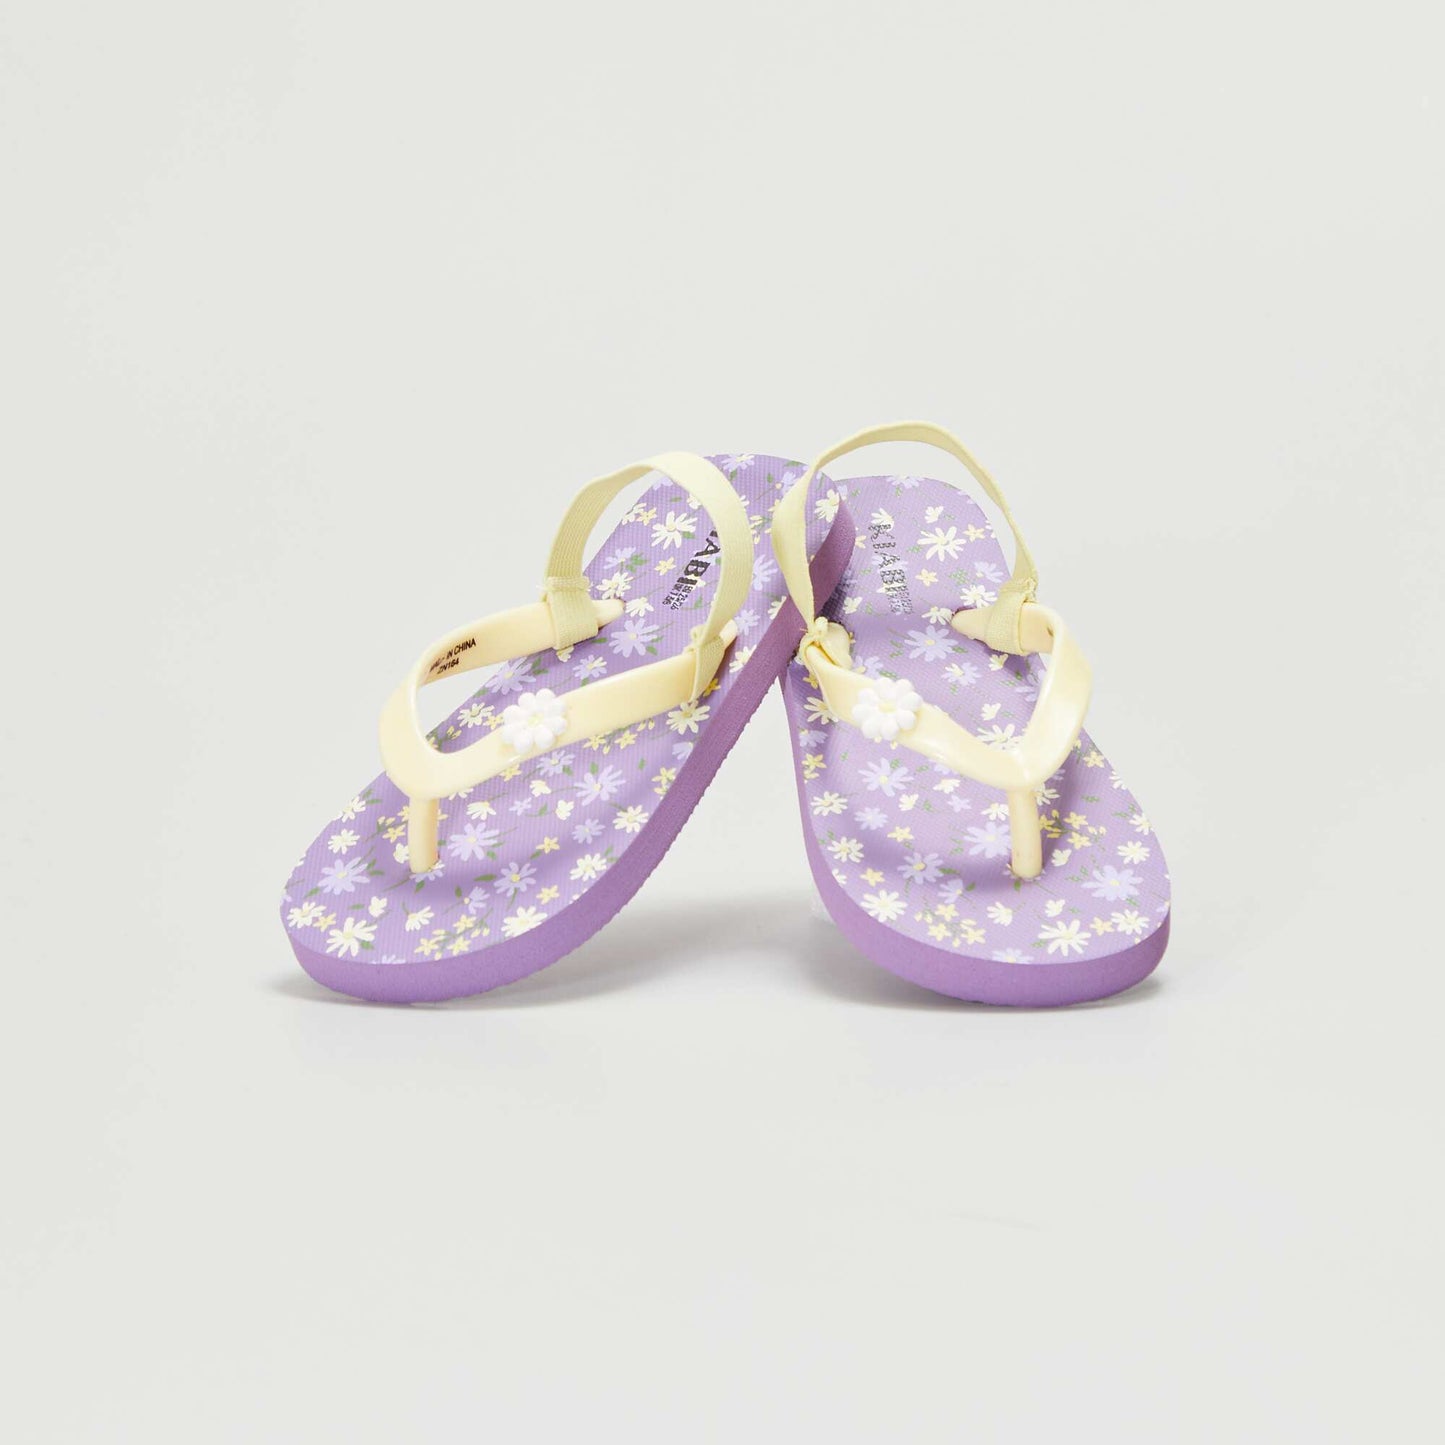 Flip-flops with support strap PURPLE